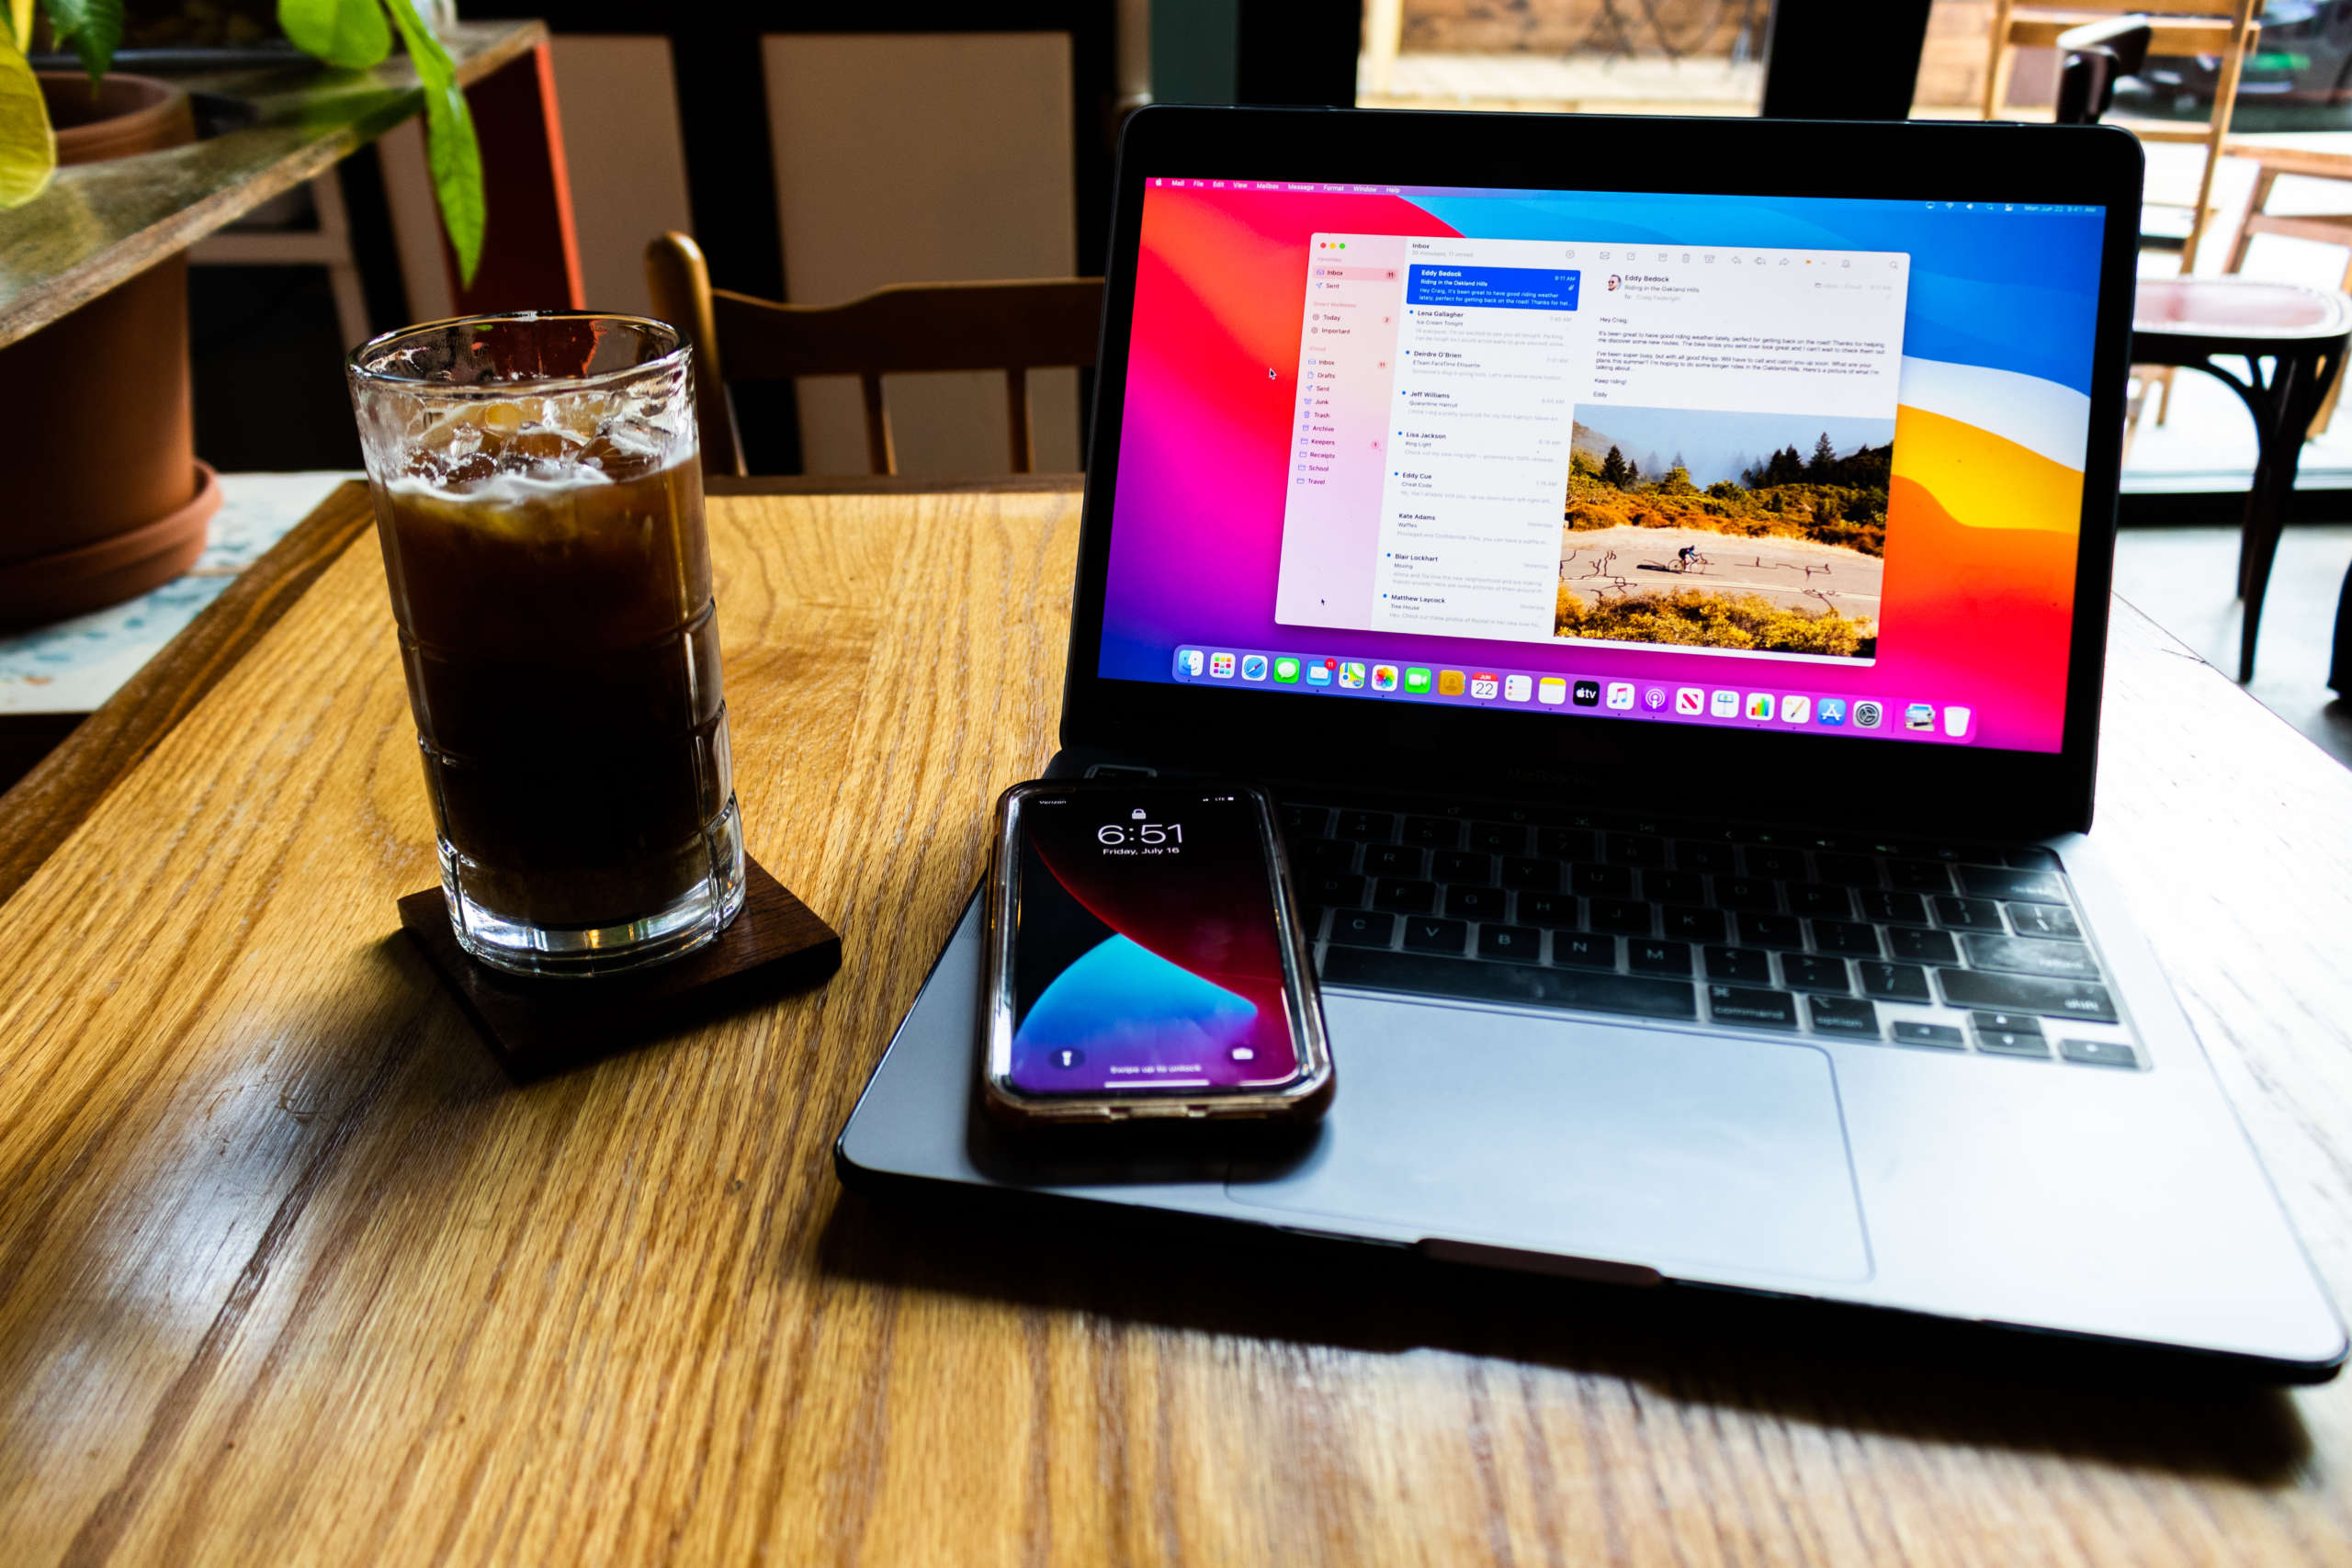 An iPhone and a laptop with Mac notes app open in cafe.